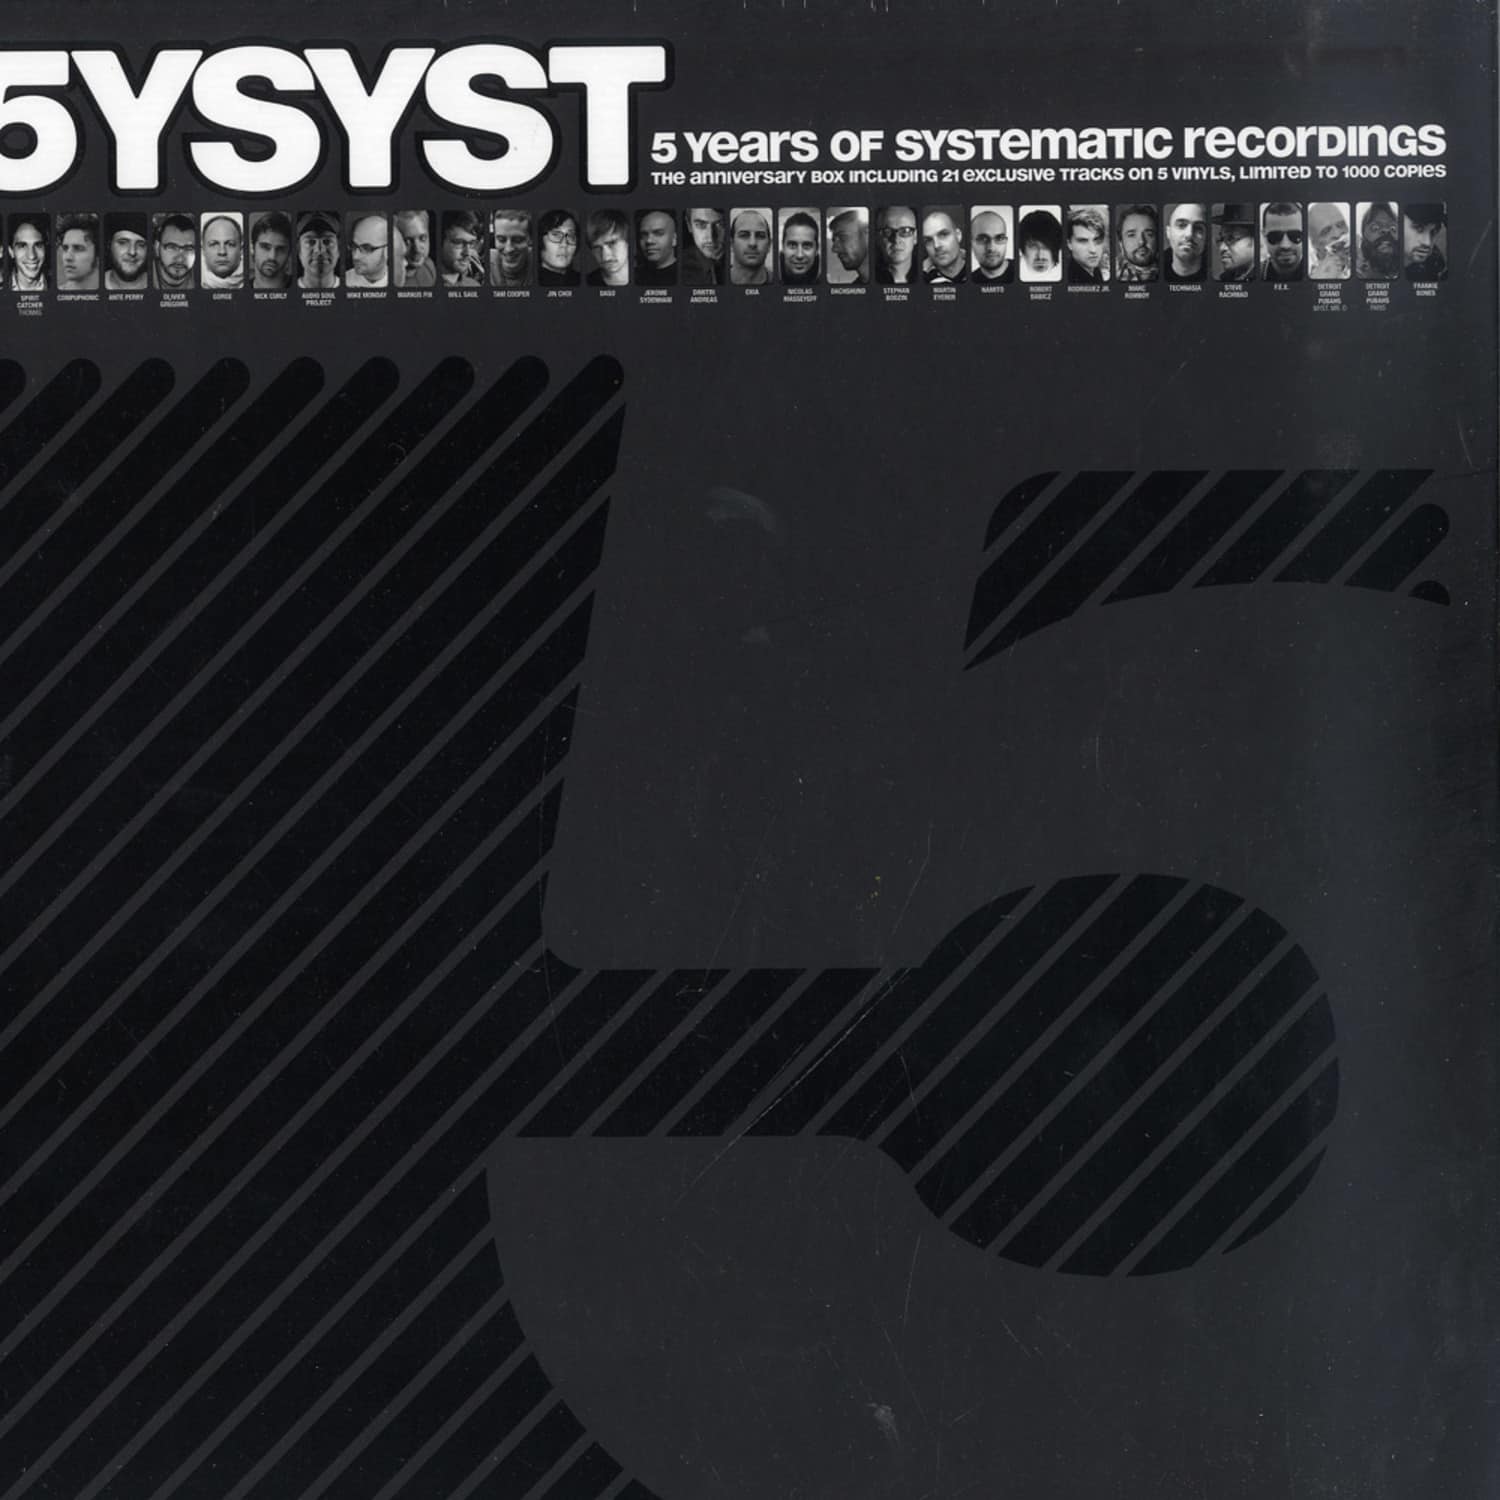 Various Artists - 5YSYST 